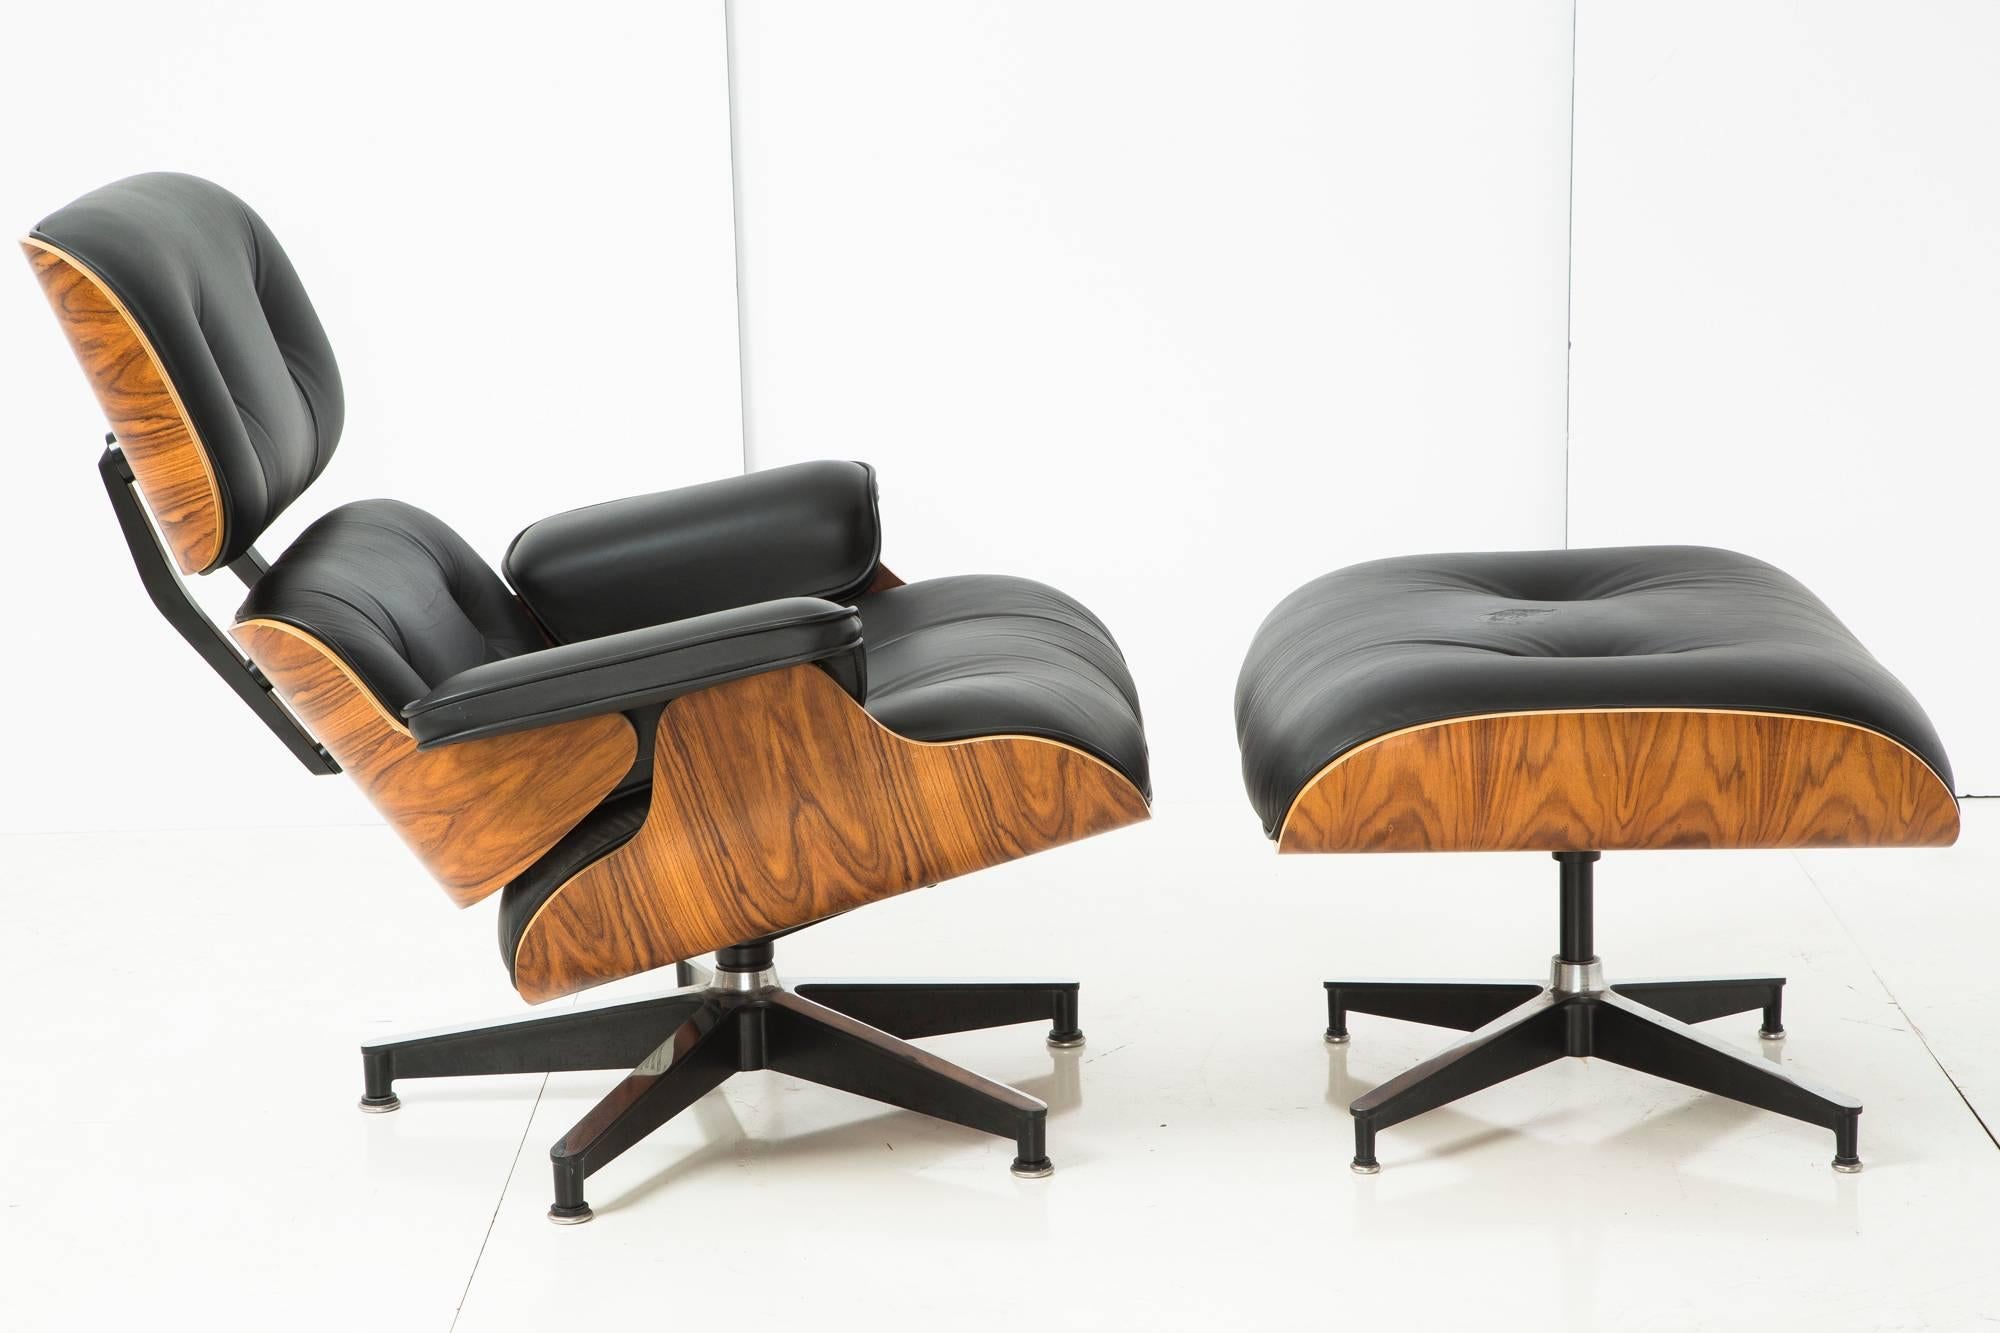 Eames Office celebrated the 50th birthday of the lounge chair, one of Mid-Century's most iconic designs, with this special edition production. Molded plywood frame with rosewood veneer and black leather upholstery.